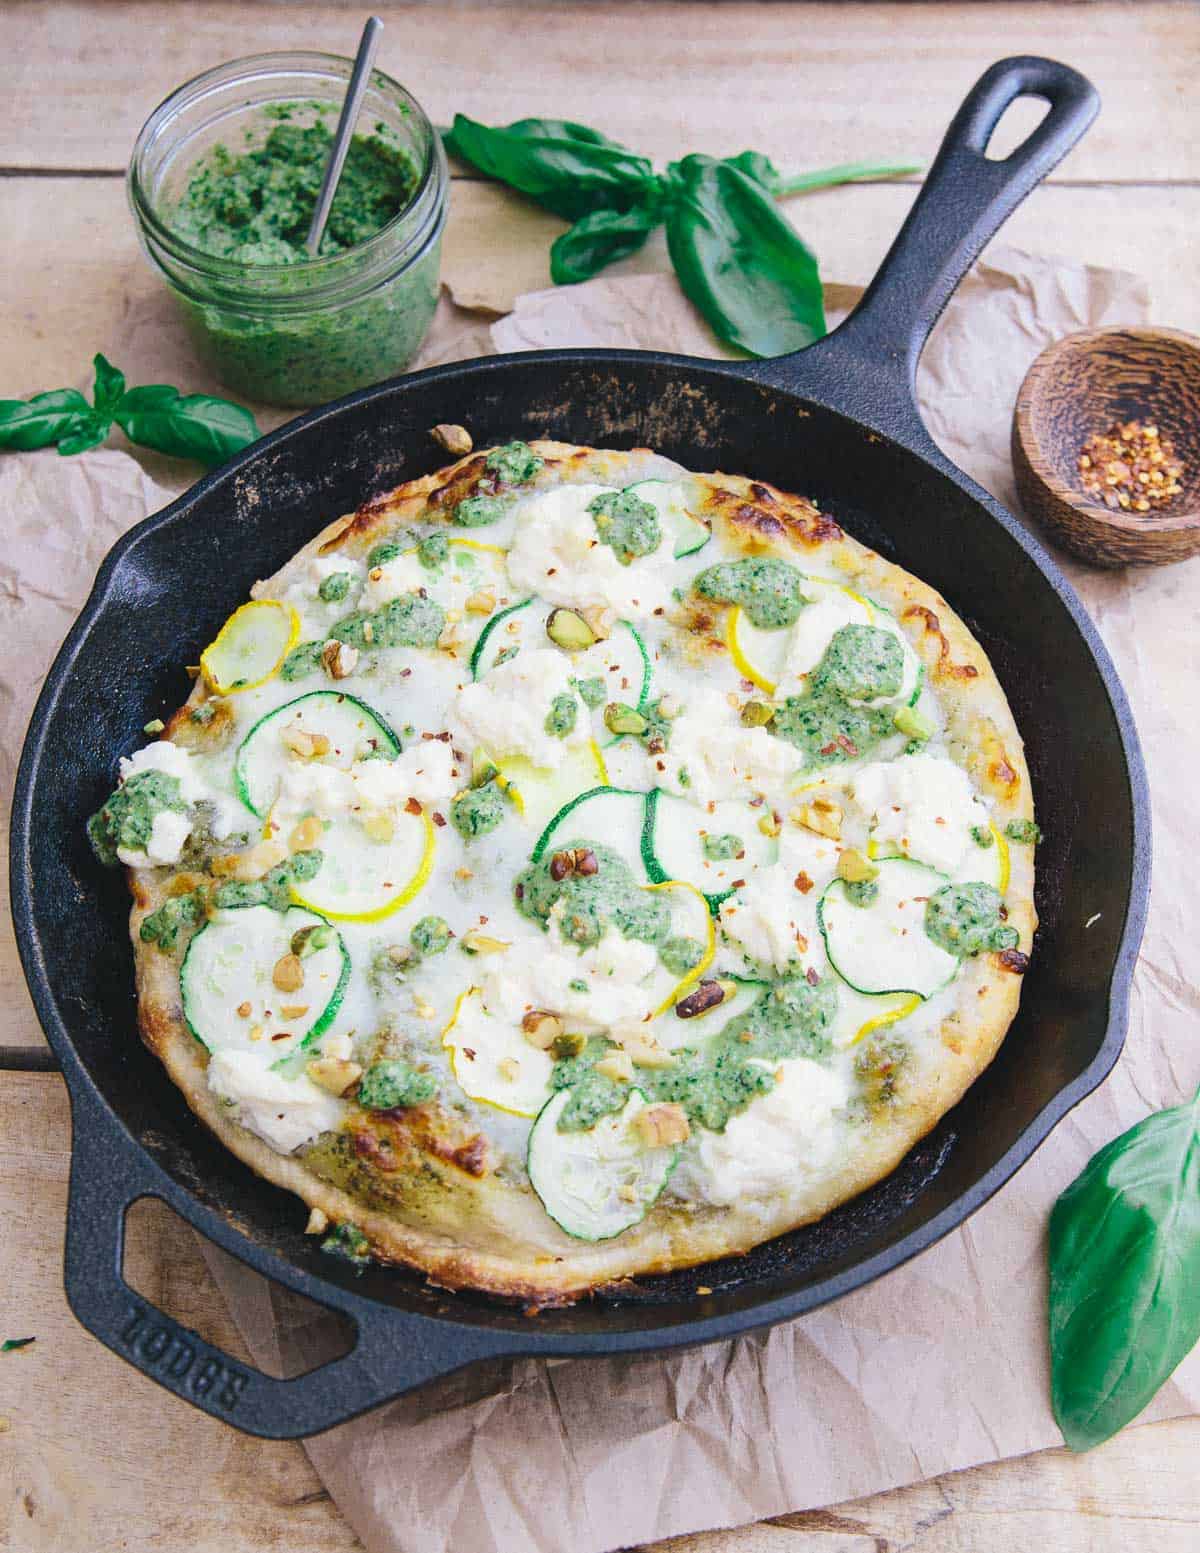 This skillet zucchini pesto pizza has a crispy yet chewy crust. With layers of tangy basil pesto, mozzarella, zucchini and ricotta it's perfect for summer!